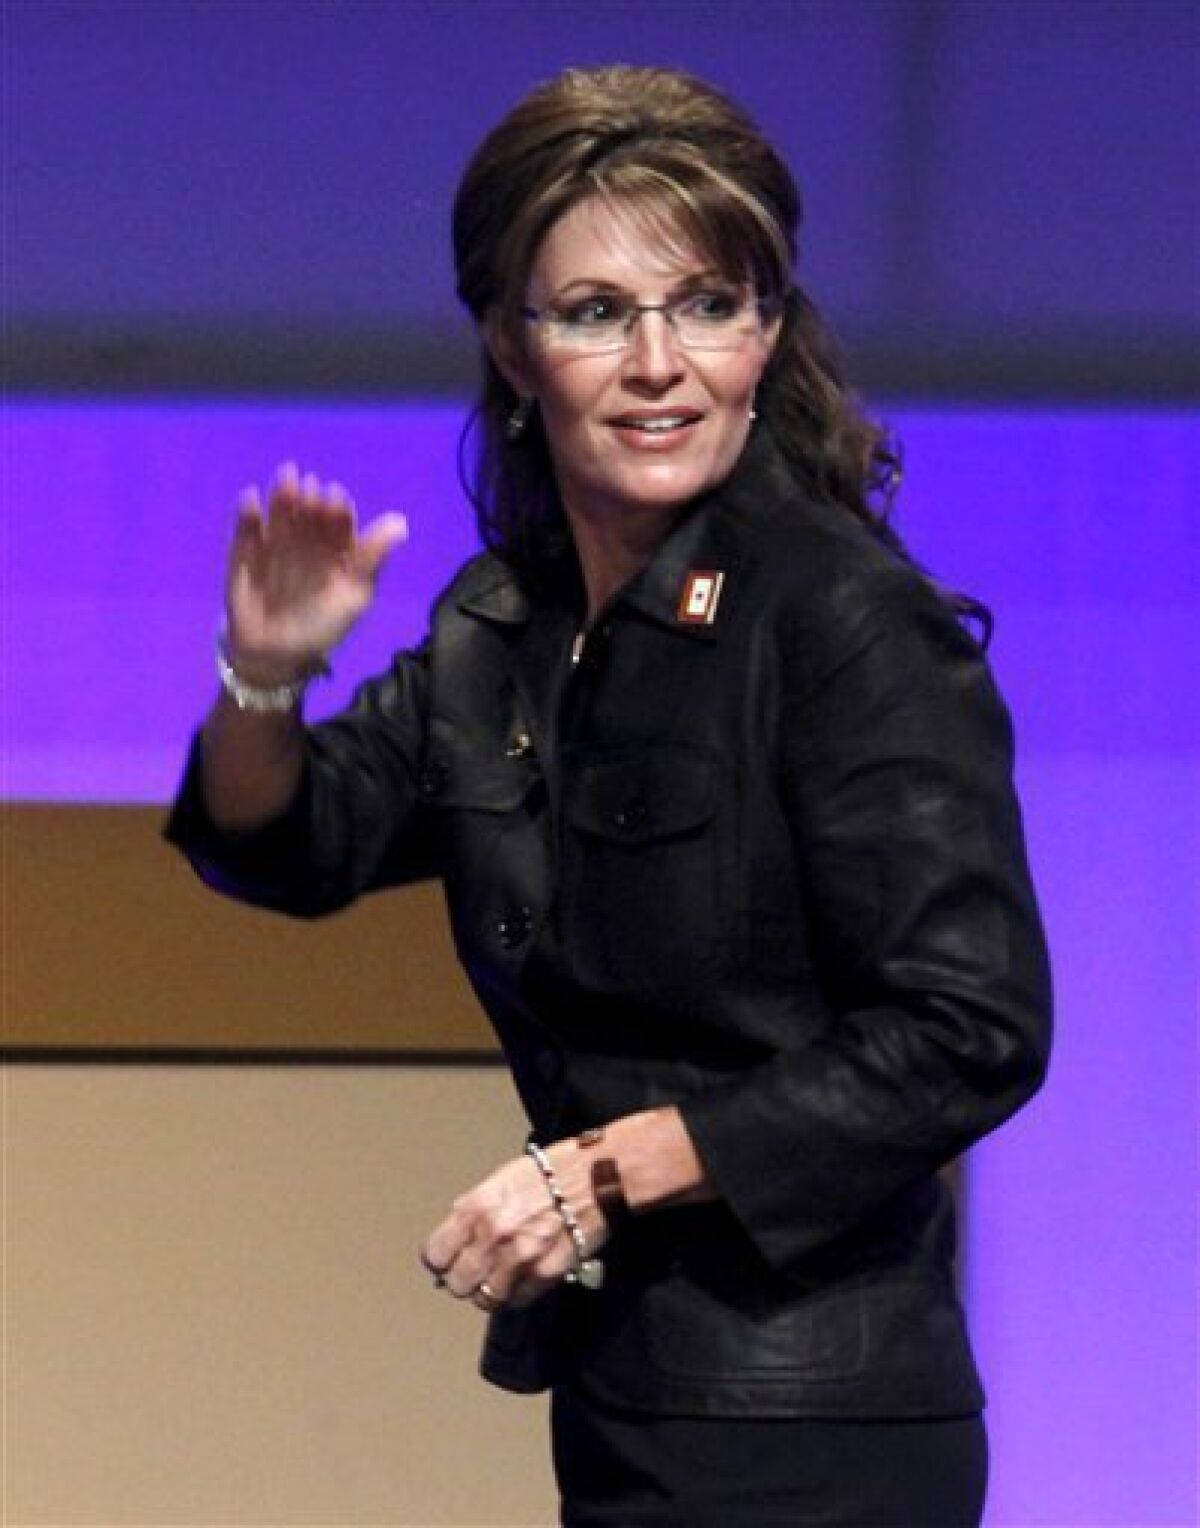 "Sarah Palin Gazing Off To The Side" Wallpaper